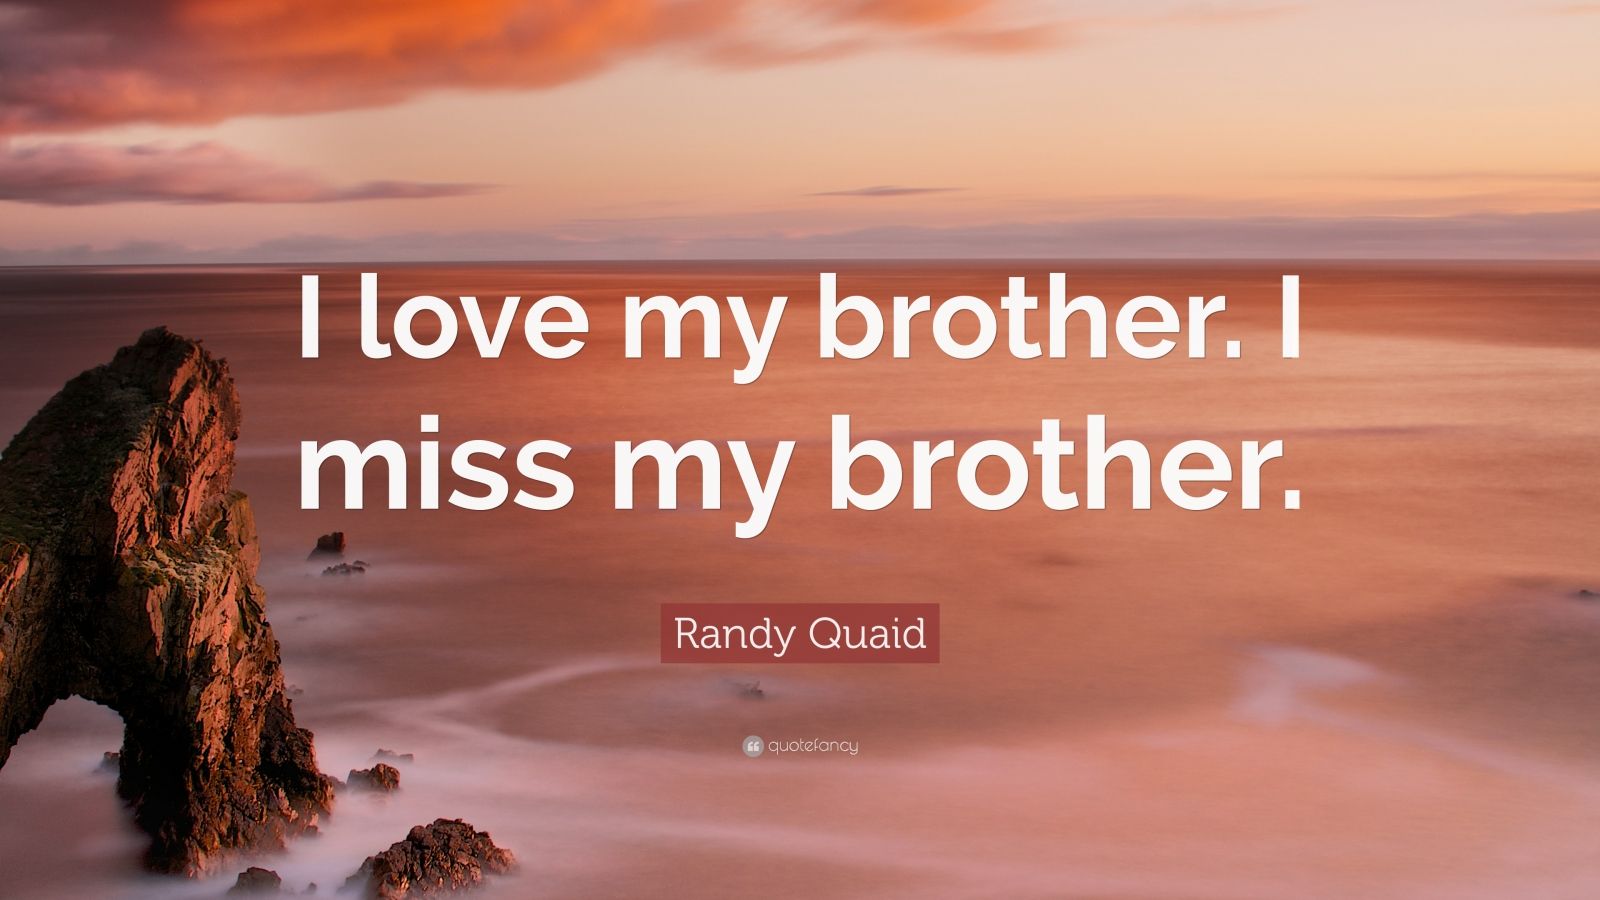 Randy Quaid Quote: “I love my brother. I miss my brother.” (9